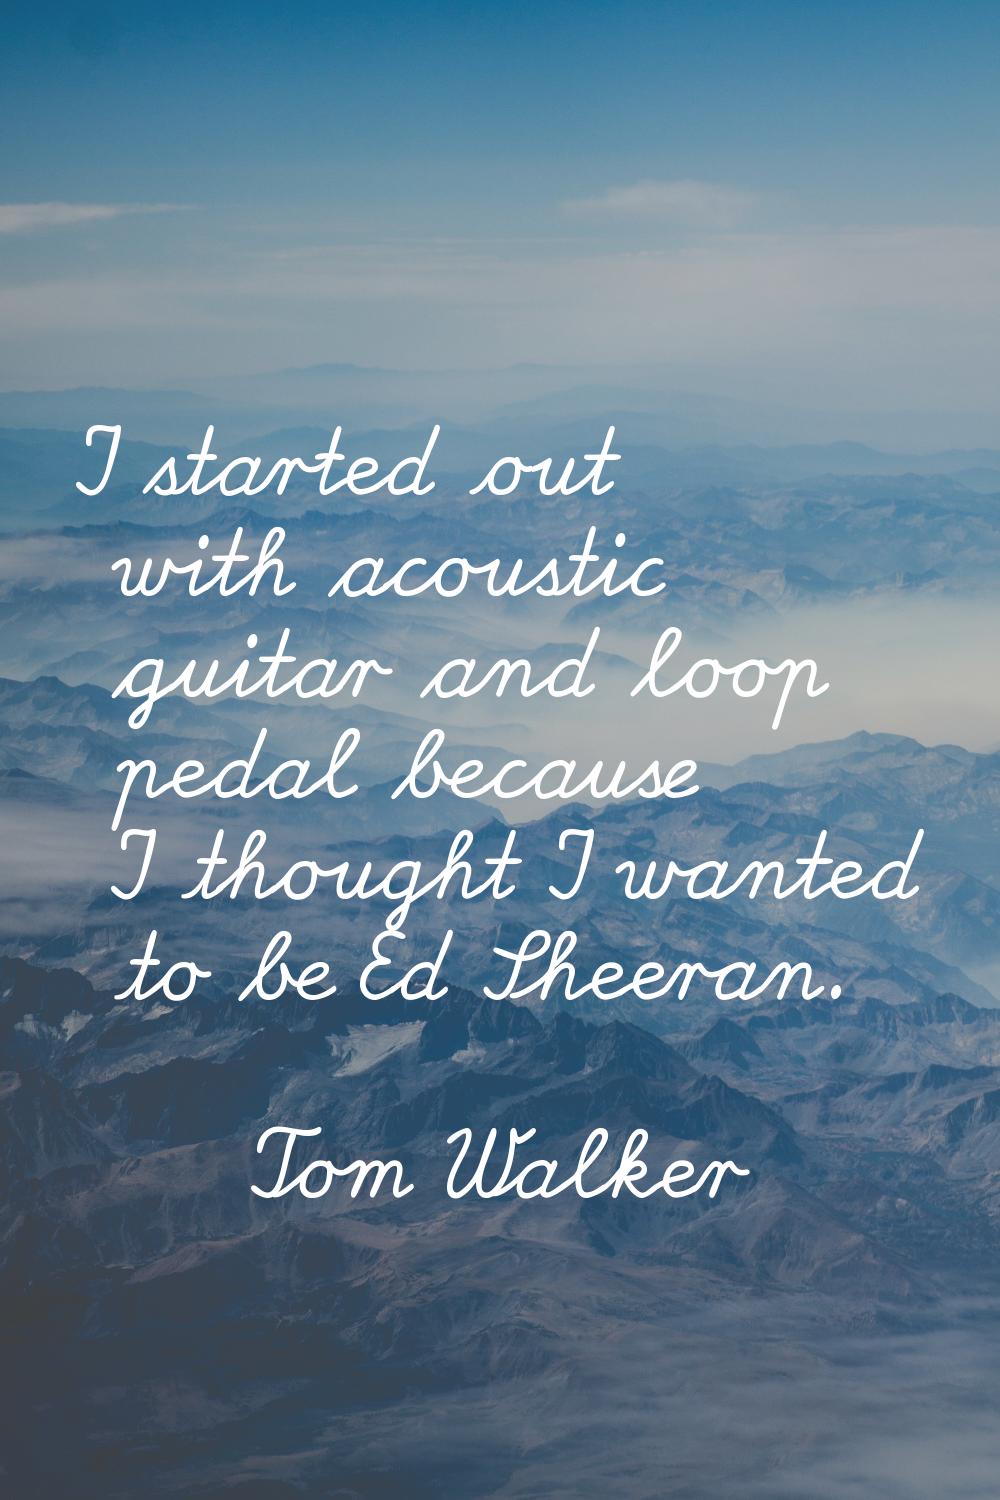 I started out with acoustic guitar and loop pedal because I thought I wanted to be Ed Sheeran.